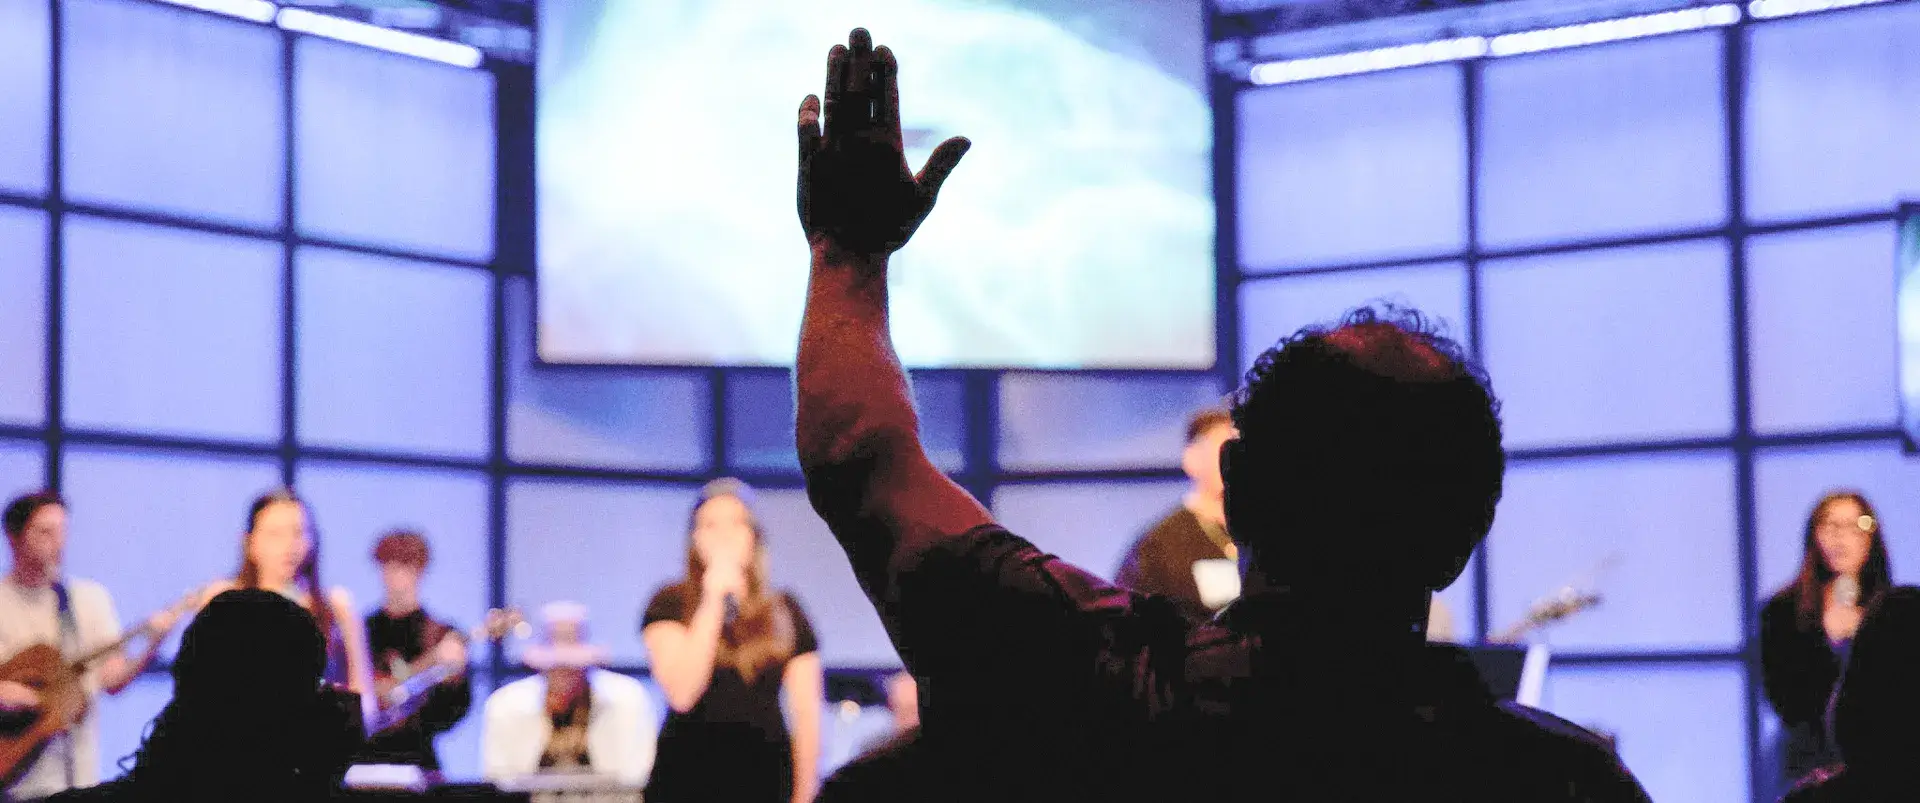 Worship service in Pinellas Park at Elevated Church